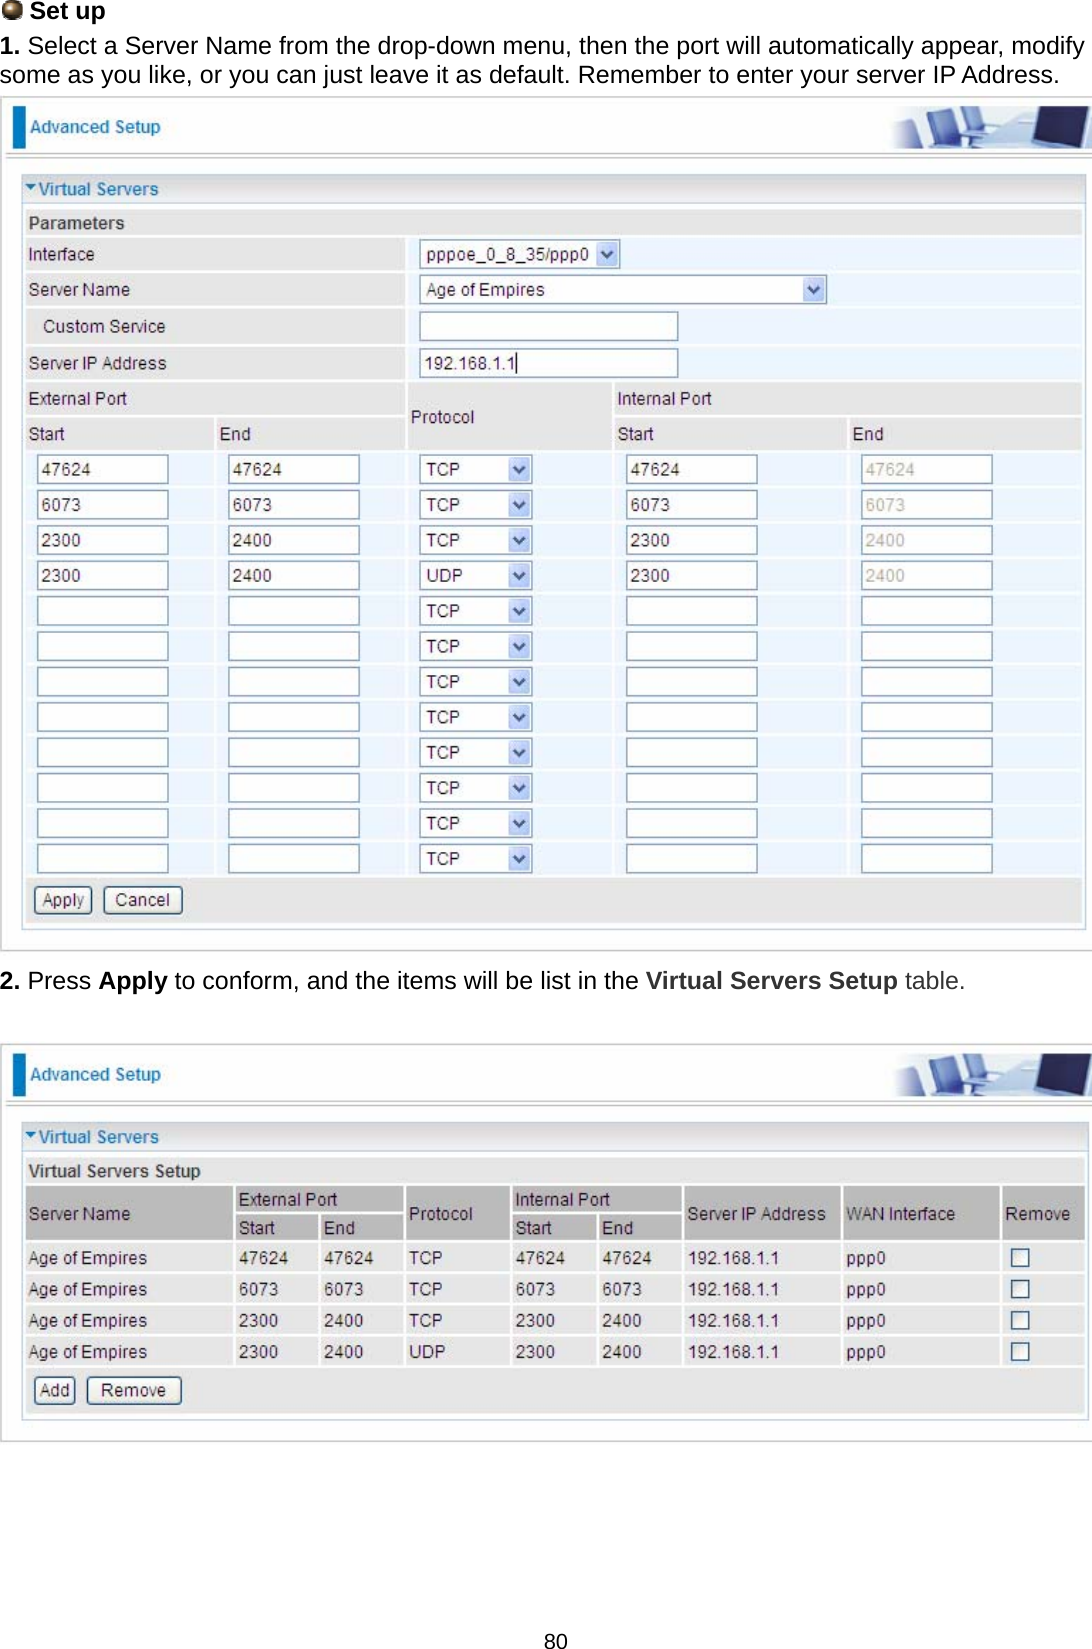  80  Set up  1. Select a Server Name from the drop-down menu, then the port will automatically appear, modify some as you like, or you can just leave it as default. Remember to enter your server IP Address.  2. Press Apply to conform, and the items will be list in the Virtual Servers Setup table.       